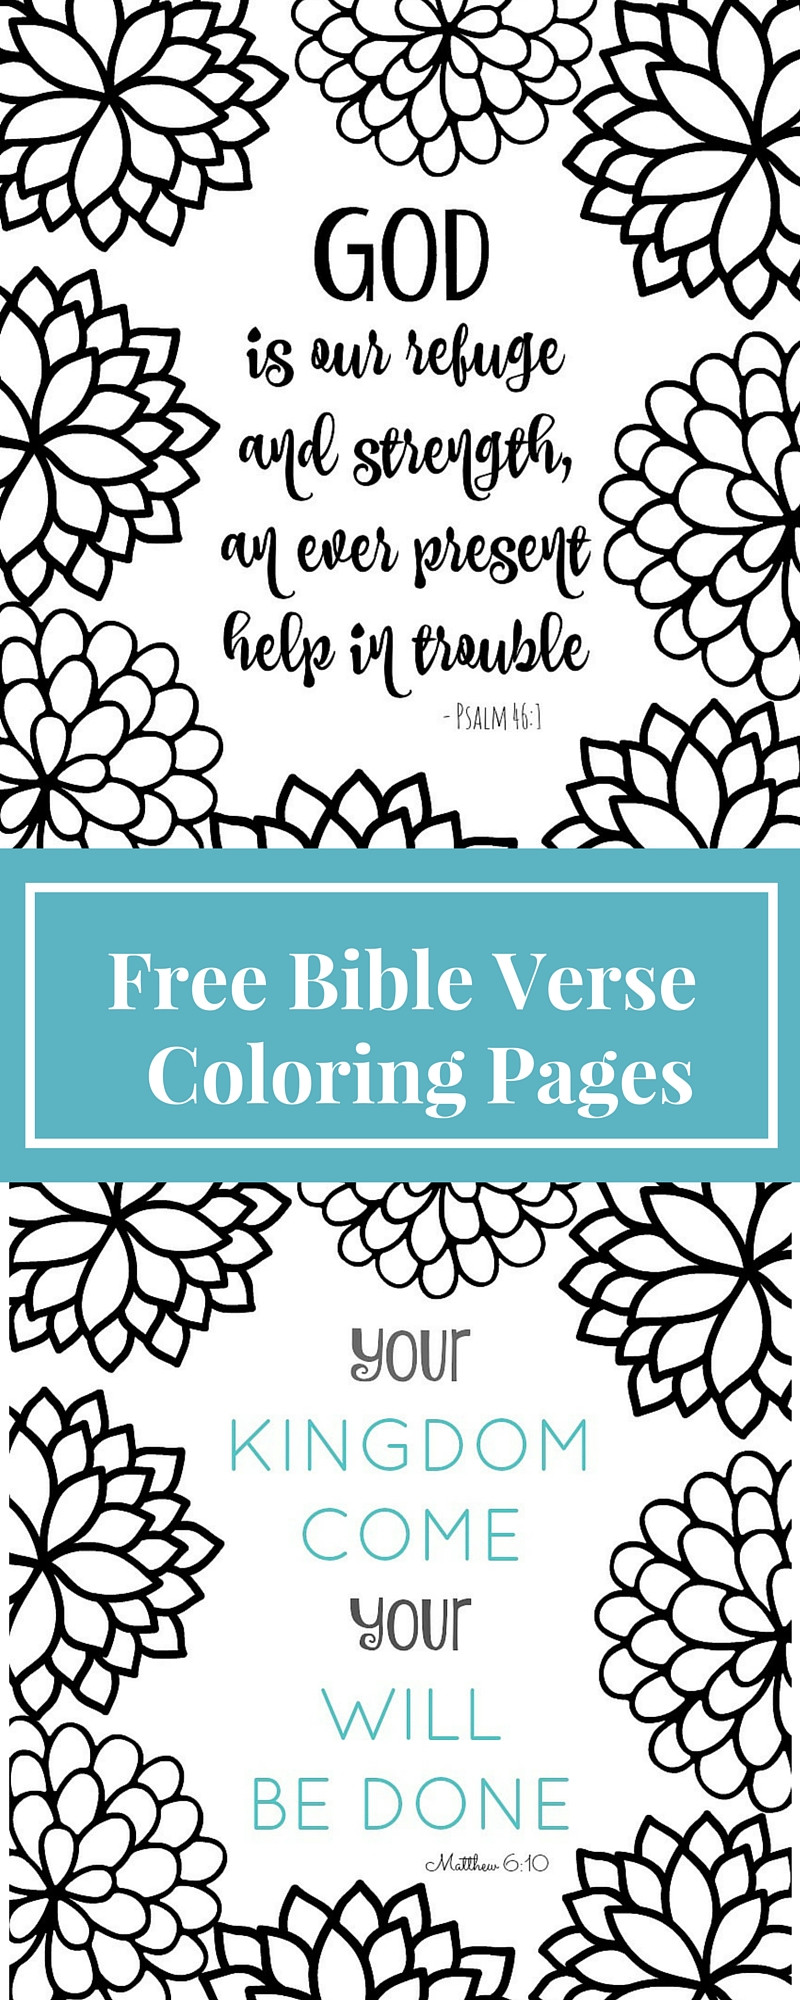 Bible Verse Coloring Pages Free Printable
 Free Printable Bible Verse Coloring Pages with Bursting